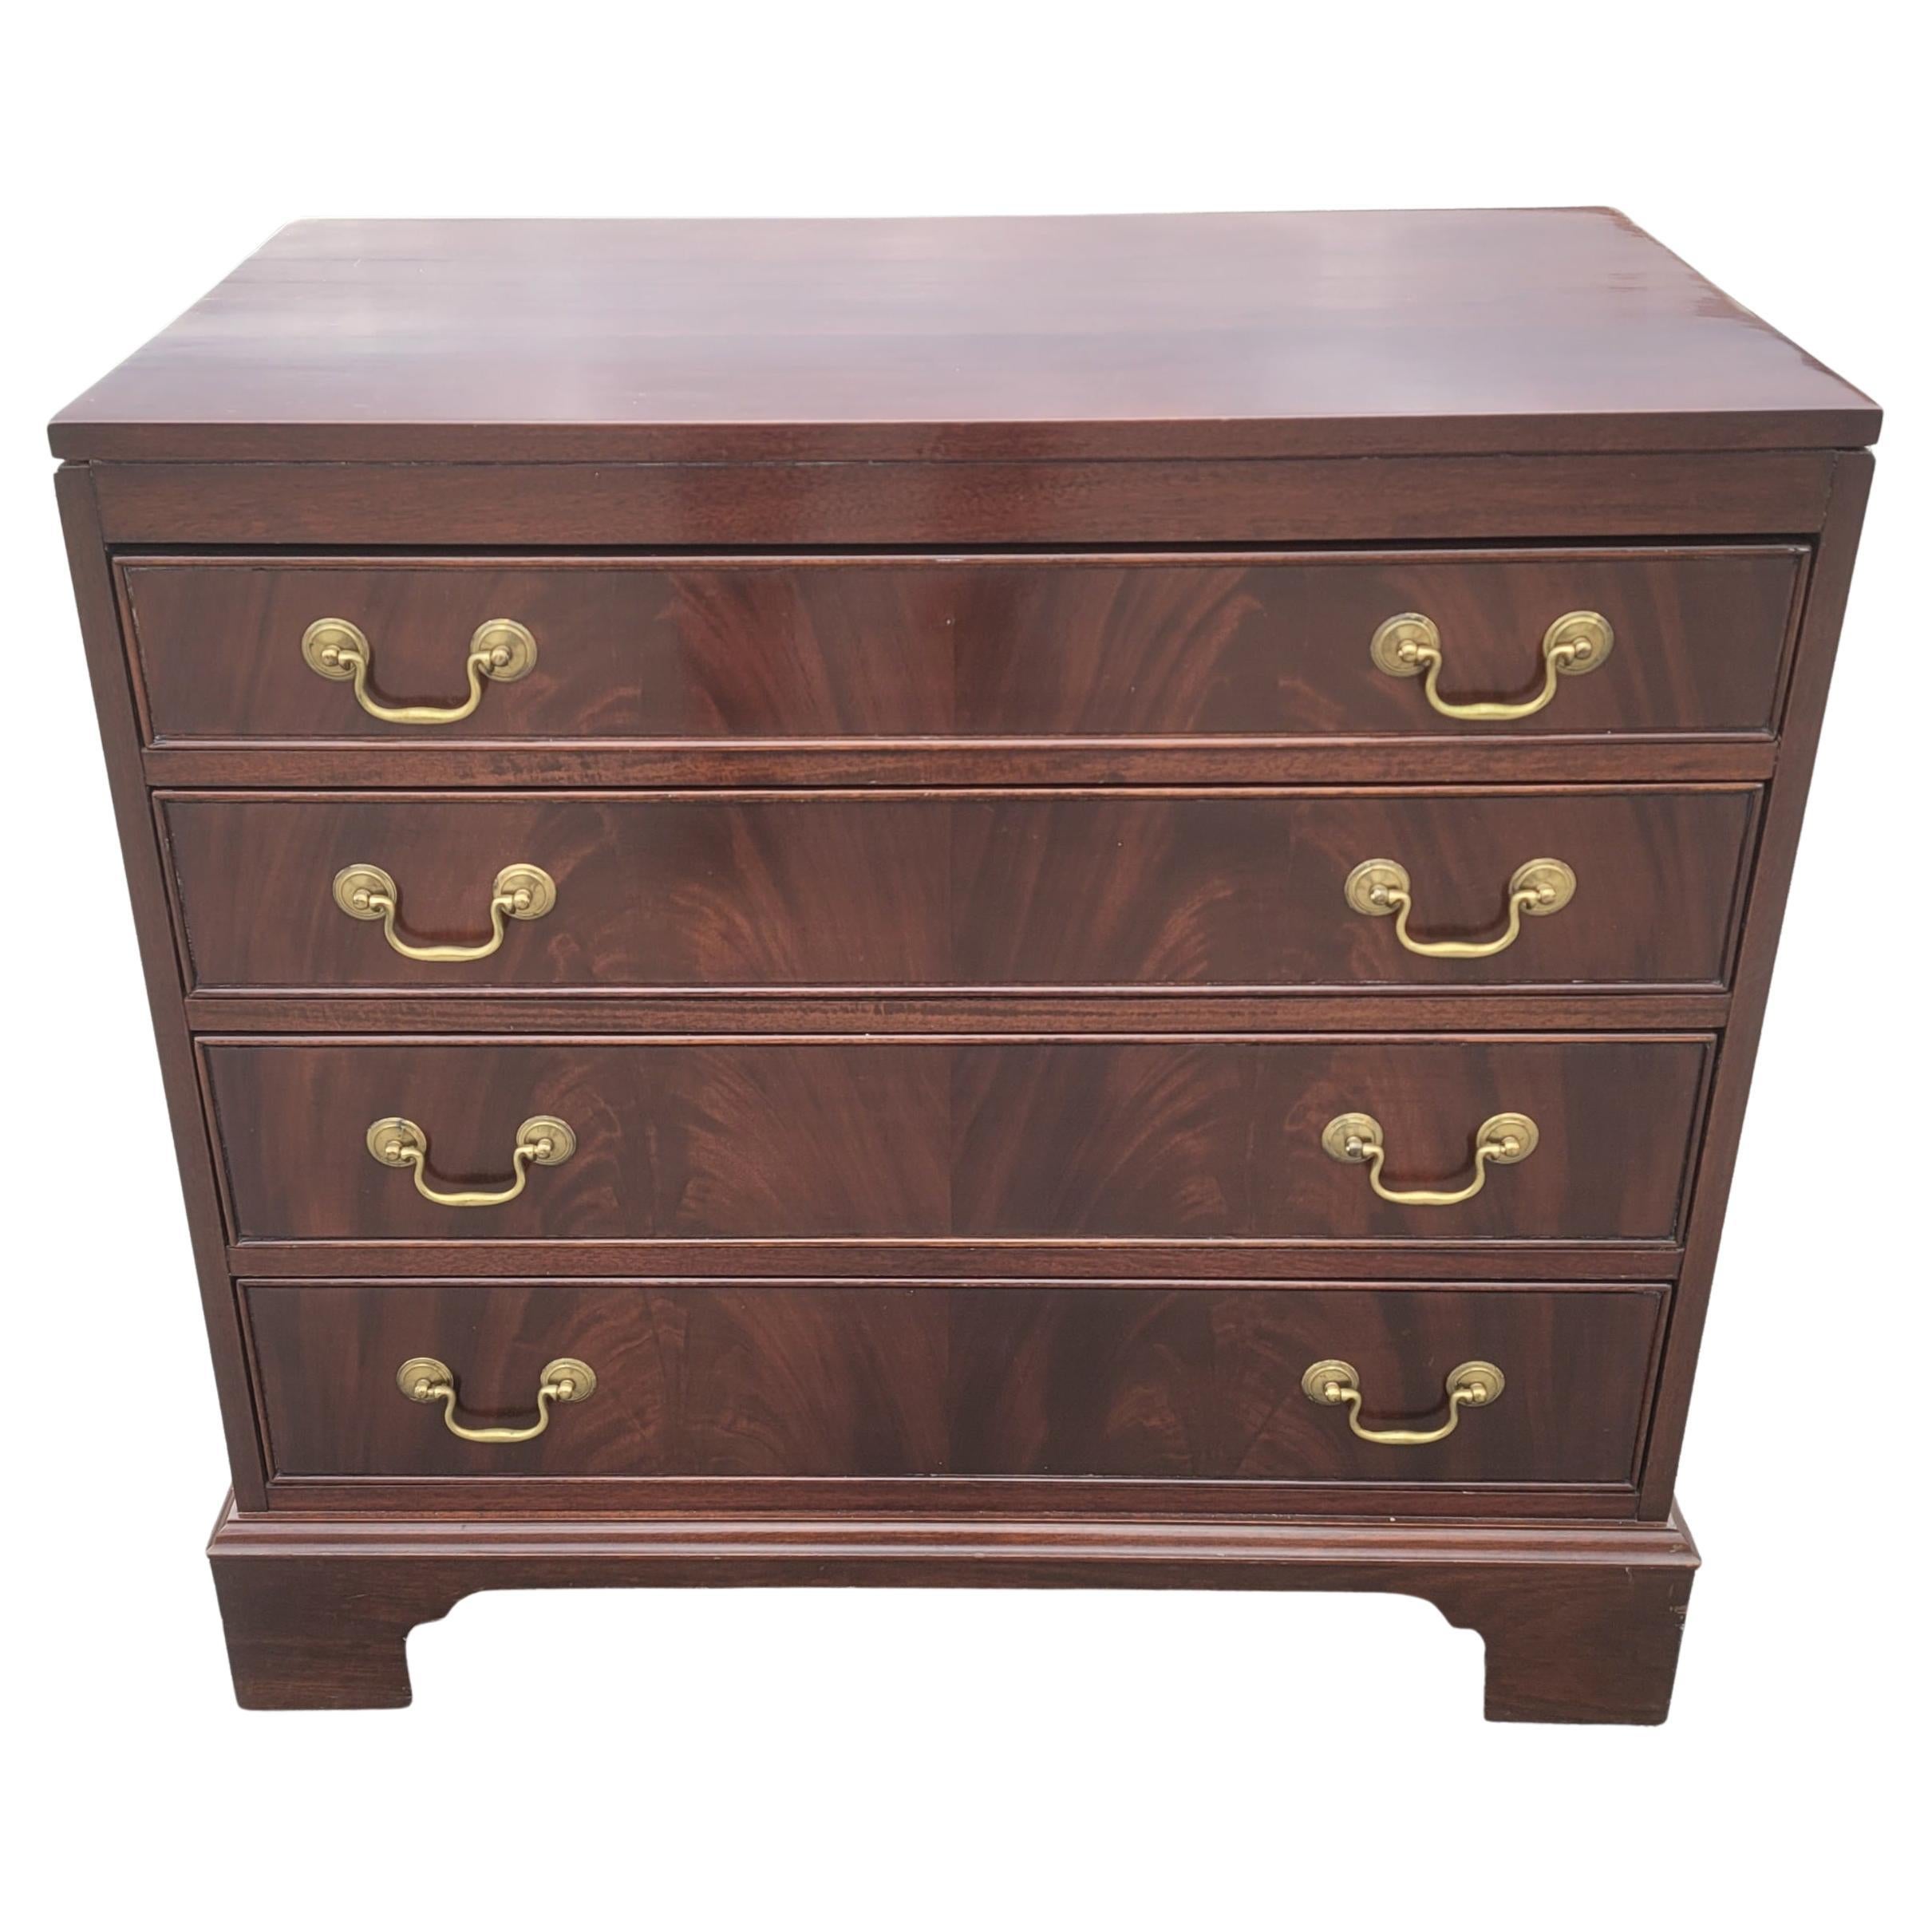 Jasper Cabinet Chippendale Flame Mahogany Commode Chest of Drawers 3